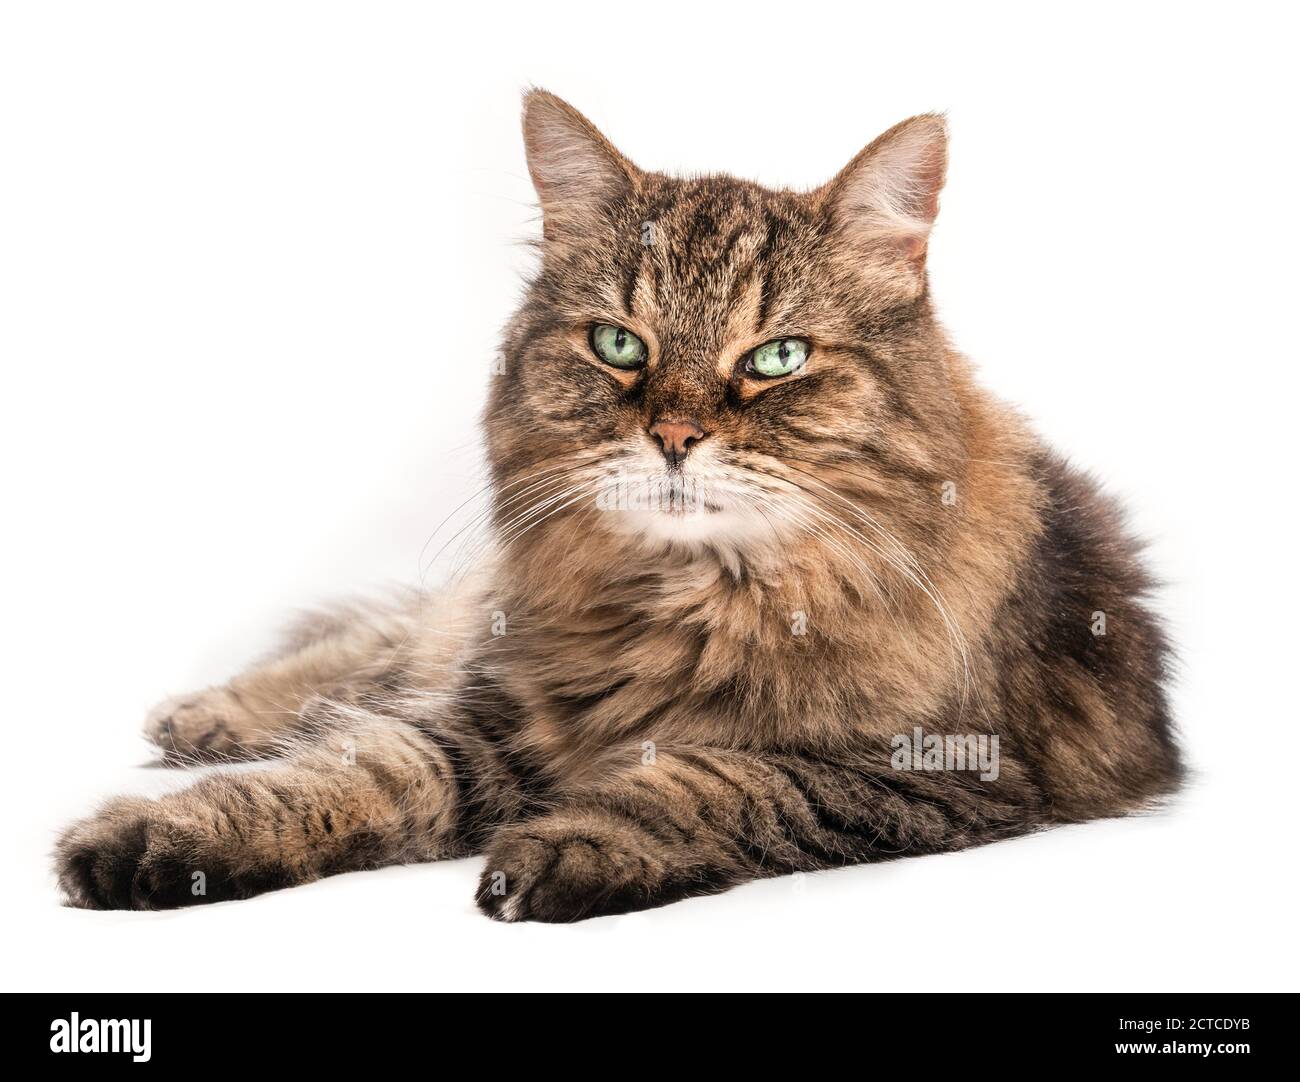 Long hair tabby cat with beautiful green eyes and long whiskers, lying sideways. Relaxed senior cat (14 years) looking at camera. Full body portrait. Stock Photo